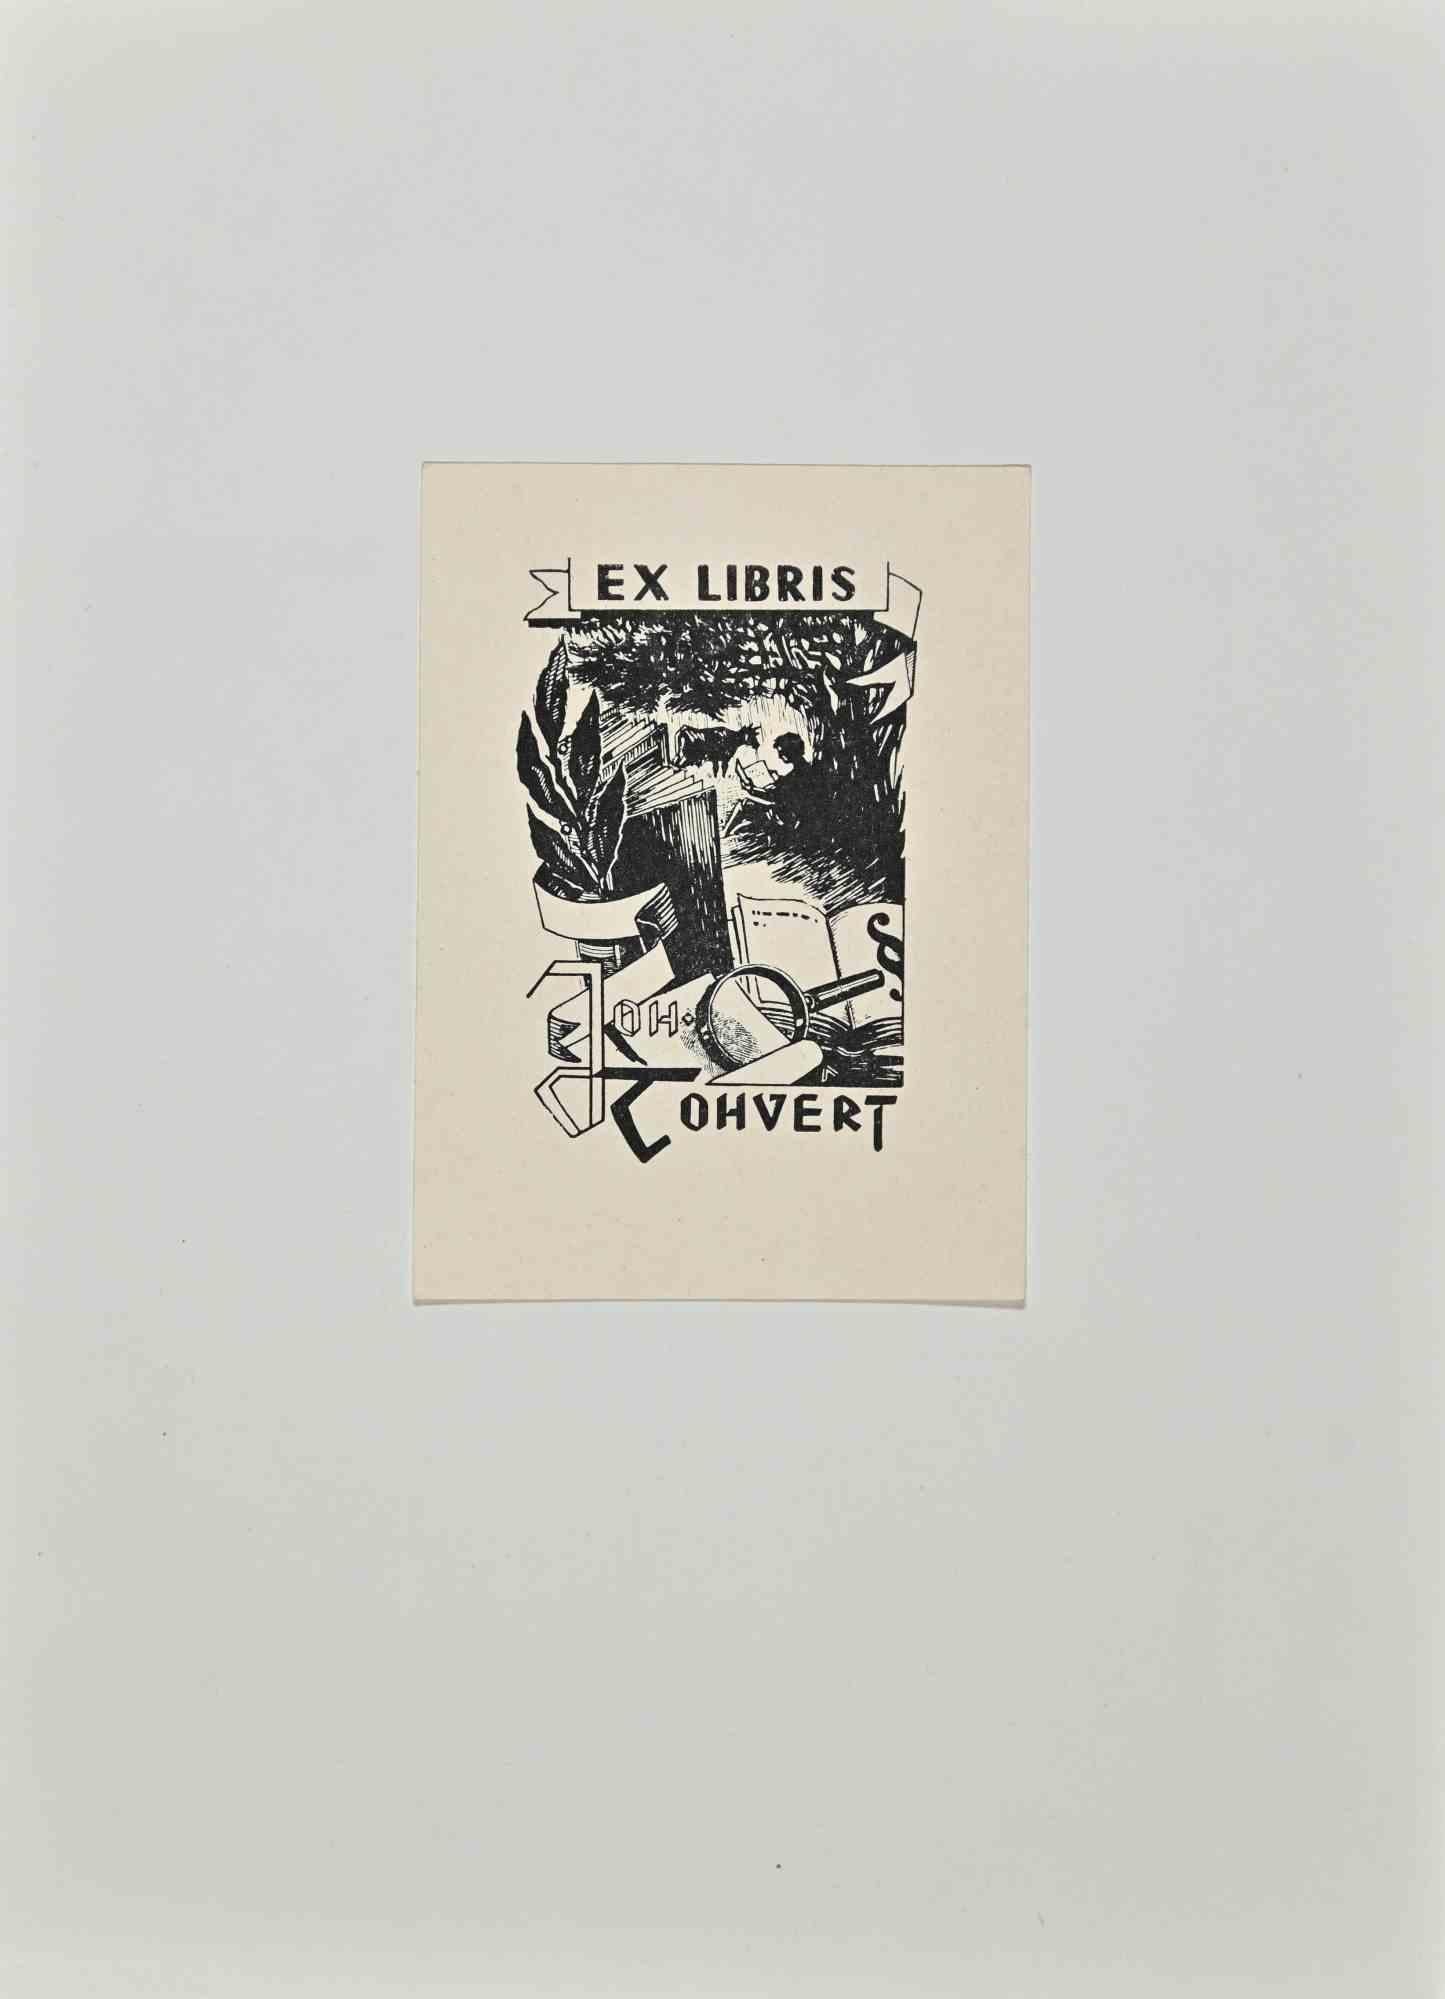  Ex Libris  - Joh Tohvert - Woodcut - Mid 20th Century - Art by Unknown